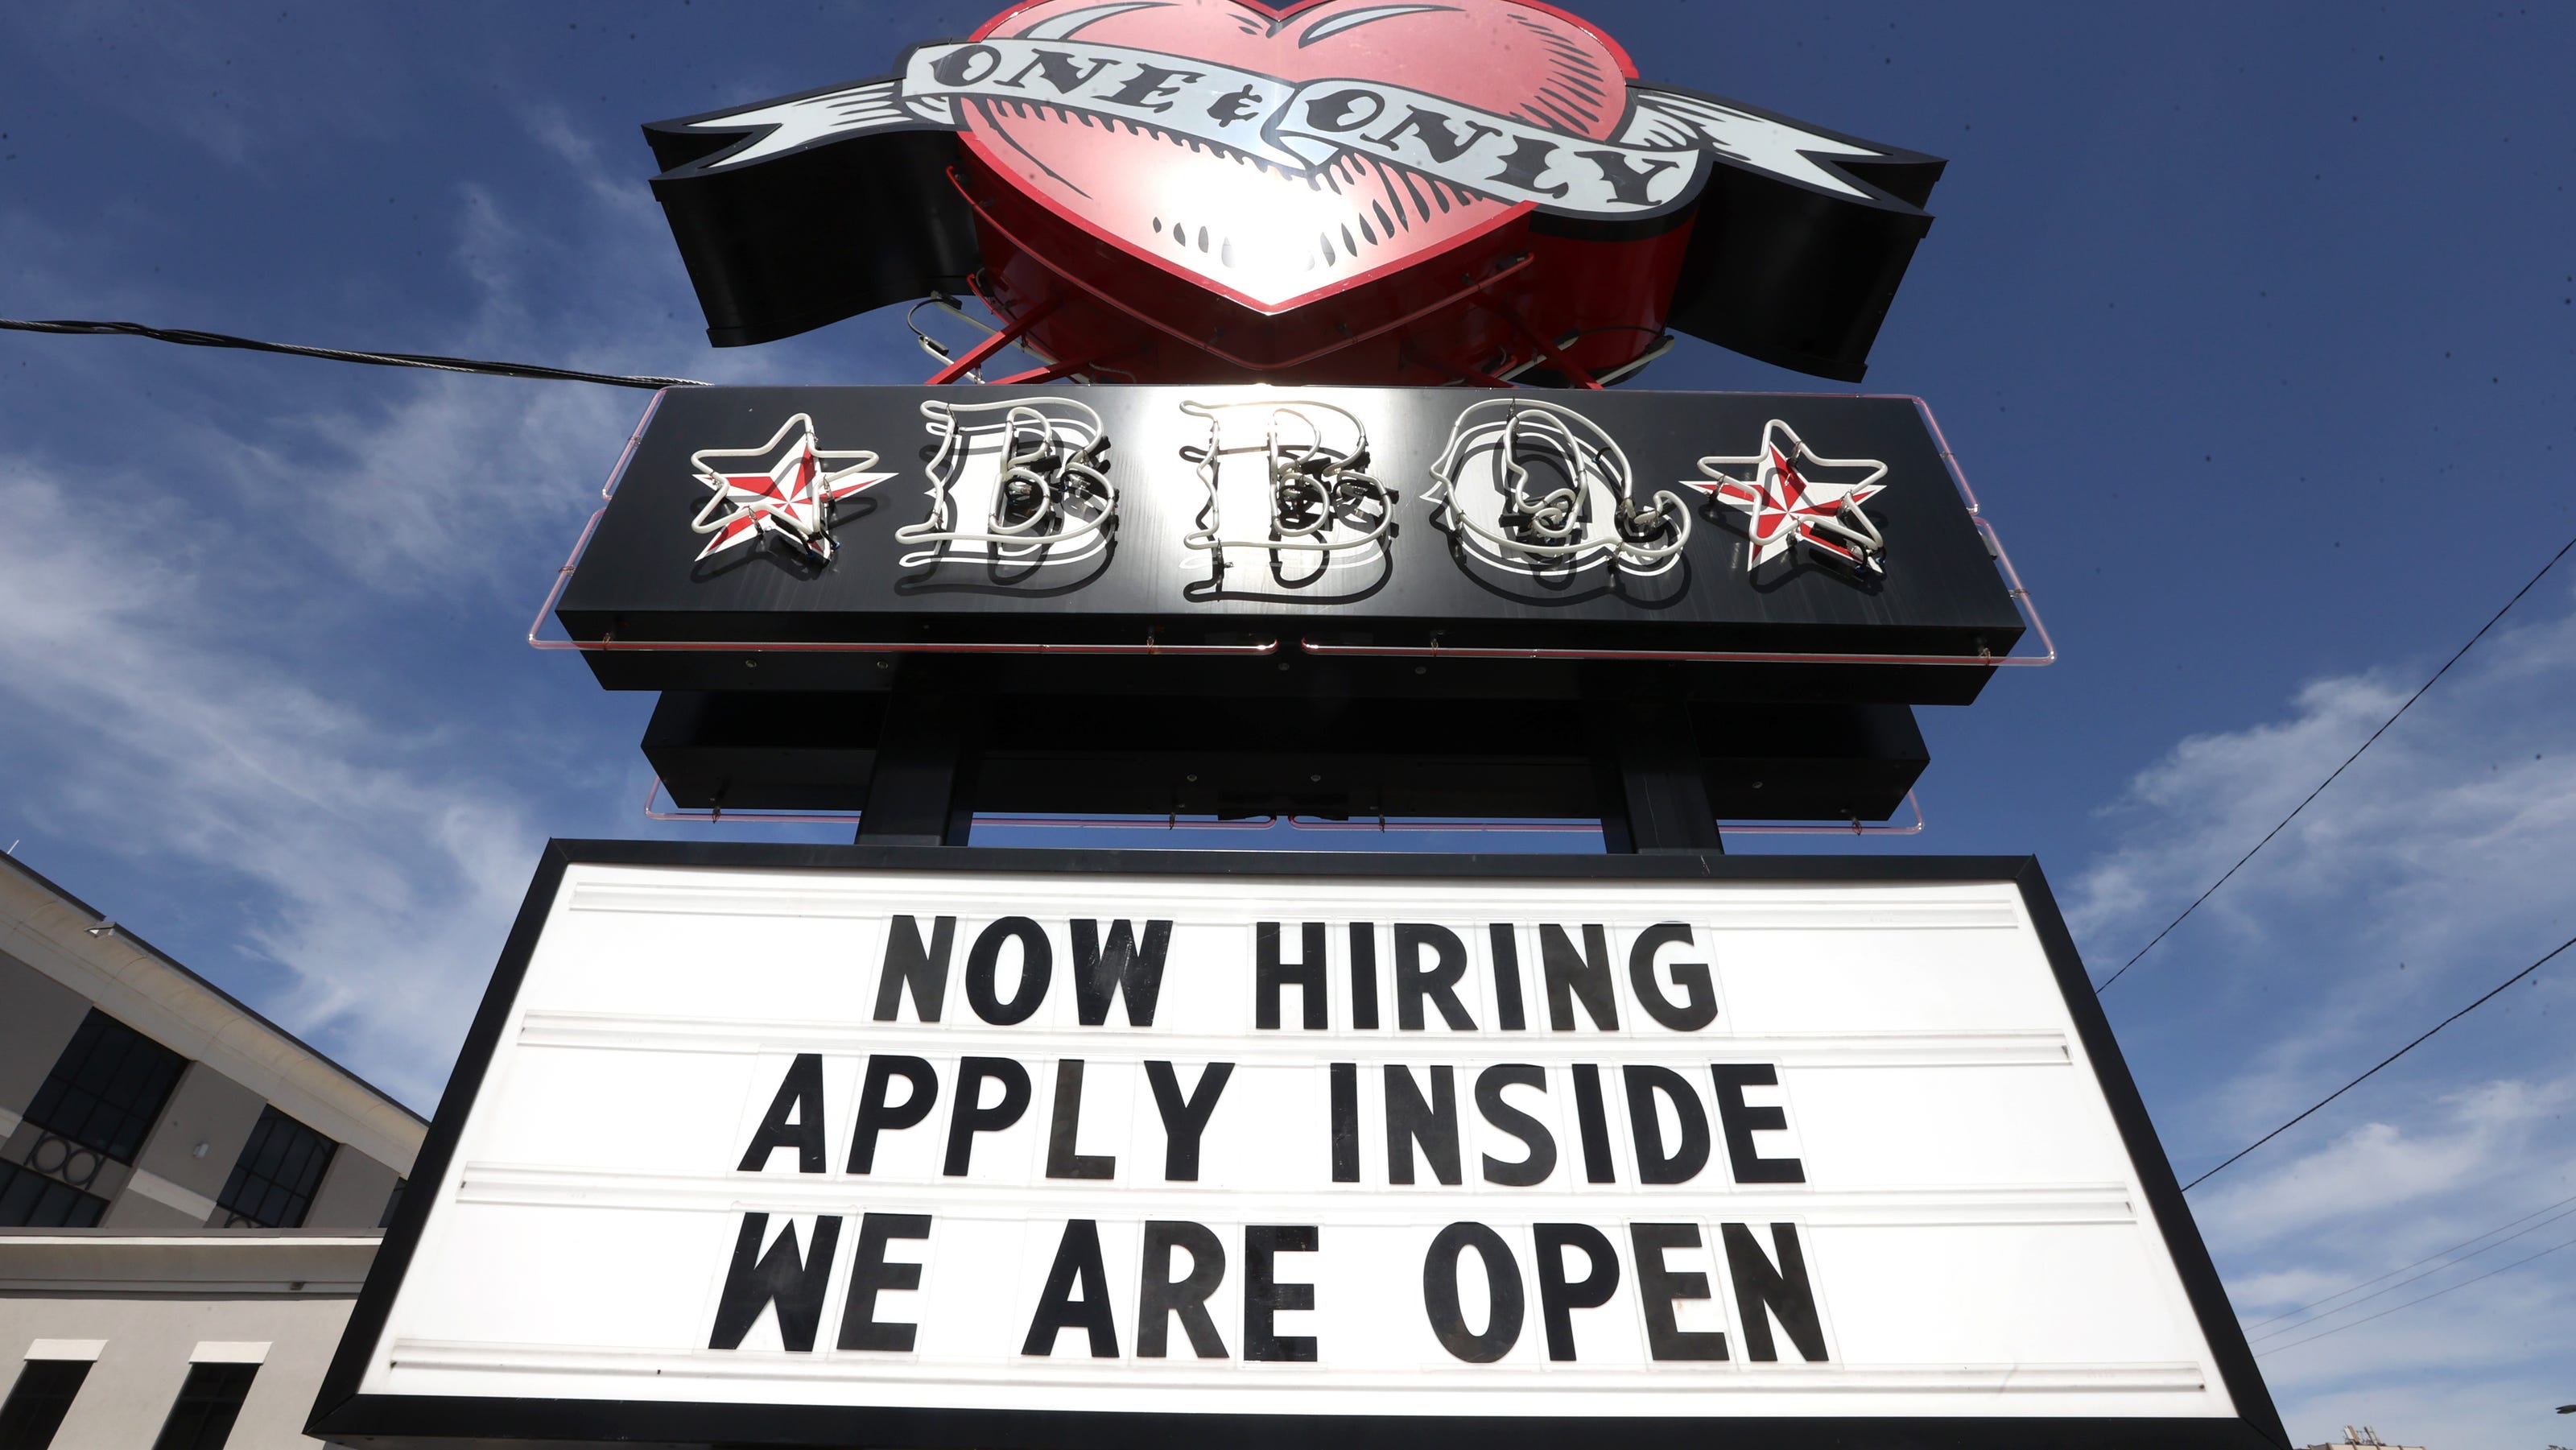 Memphis restaurants struggle to find workers as COVID-19 restrictions ease